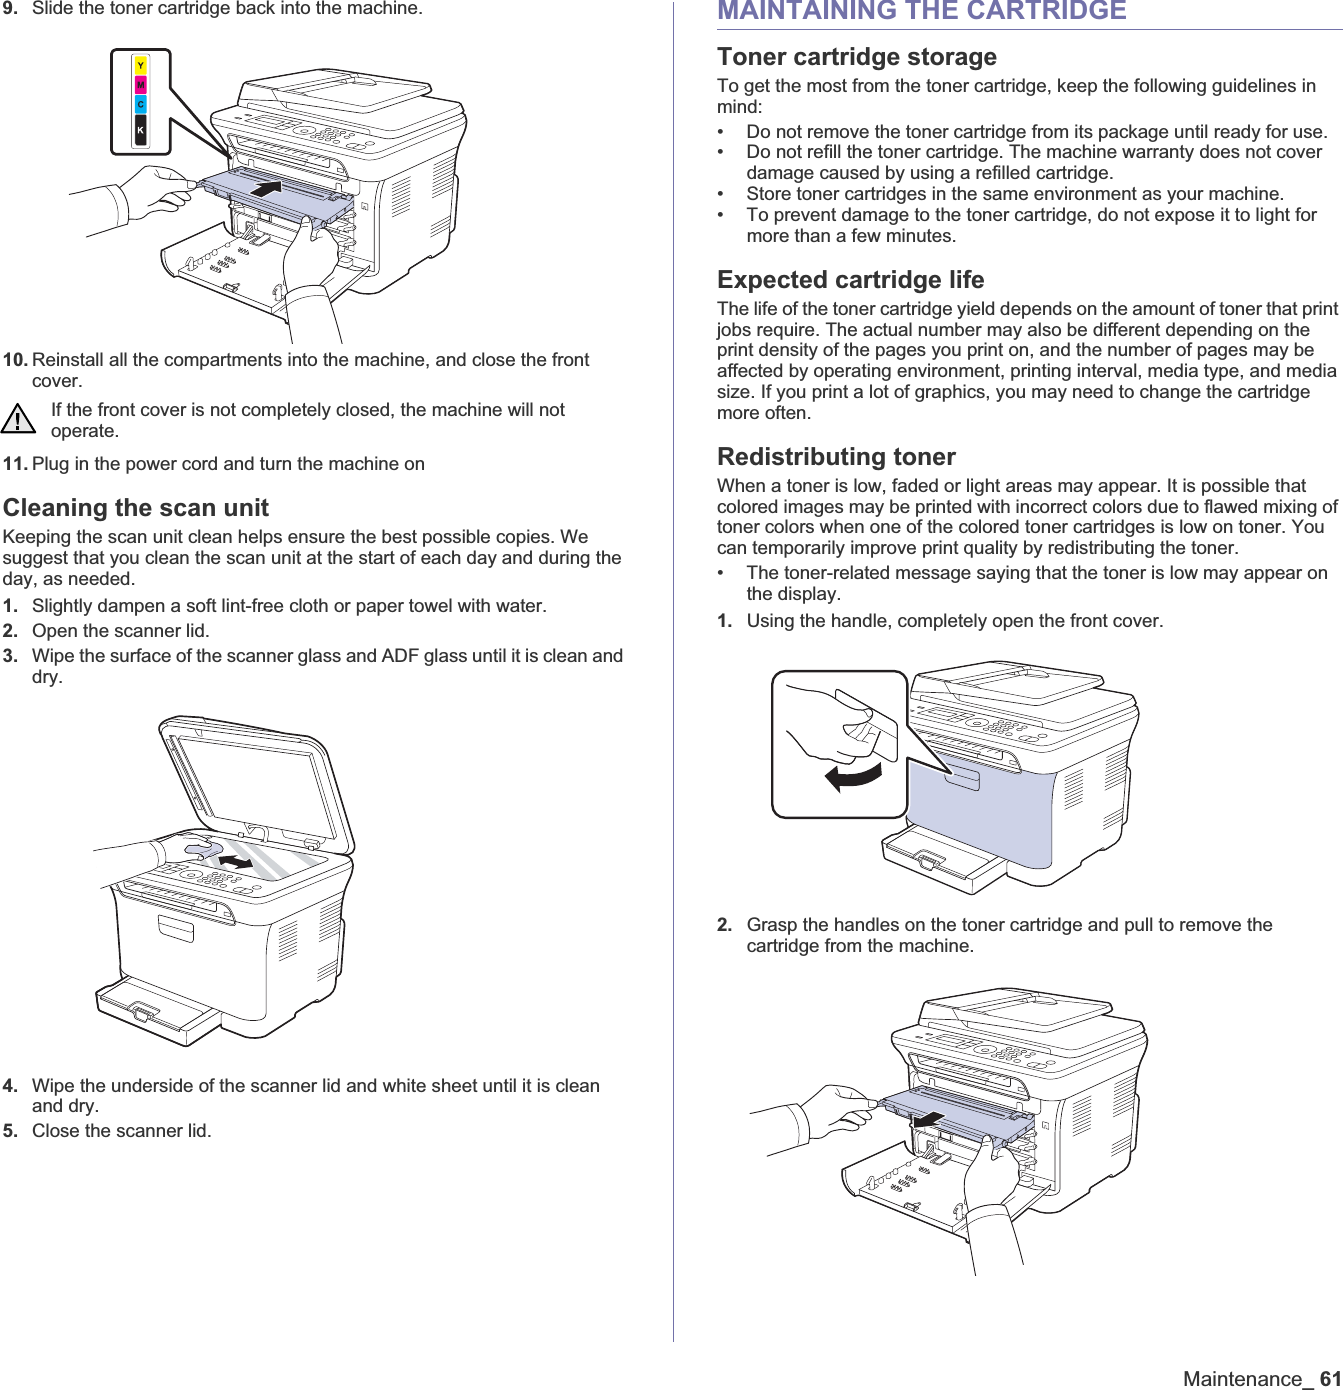 Maintenance_619. Slide the toner cartridge back into the machine.10. Reinstall all the compartments into the machine, and close the front cover.11. Plug in the power cord and turn the machine onCleaning the scan unitKeeping the scan unit clean helps ensure the best possible copies. We suggest that you clean the scan unit at the start of each day and during the day, as needed.1. Slightly dampen a soft lint-free cloth or paper towel with water.2. Open the scanner lid.3. Wipe the surface of the scanner glass and ADF glass until it is clean and dry.4. Wipe the underside of the scanner lid and white sheet until it is clean and dry.5. Close the scanner lid.MAINTAINING THE CARTRIDGEToner cartridge storageTo get the most from the toner cartridge, keep the following guidelines in mind:• Do not remove the toner cartridge from its package until ready for use. • Do not refill the toner cartridge. The machine warranty does not cover damage caused by using a refilled cartridge.• Store toner cartridges in the same environment as your machine.• To prevent damage to the toner cartridge, do not expose it to light for more than a few minutes.Expected cartridge lifeThe life of the toner cartridge yield depends on the amount of toner that print jobs require. The actual number may also be different depending on the print density of the pages you print on, and the number of pages may be affected by operating environment, printing interval, media type, and media size. If you print a lot of graphics, you may need to change the cartridge more often.Redistributing tonerWhen a toner is low, faded or light areas may appear. It is possible that colored images may be printed with incorrect colors due to flawed mixing of toner colors when one of the colored toner cartridges is low on toner. You can temporarily improve print quality by redistributing the toner.• The toner-related message saying that the toner is low may appear on the display.1. Using the handle, completely open the front cover.2. Grasp the handles on the toner cartridge and pull to remove the cartridge from the machine.If the front cover is not completely closed, the machine will not operate.